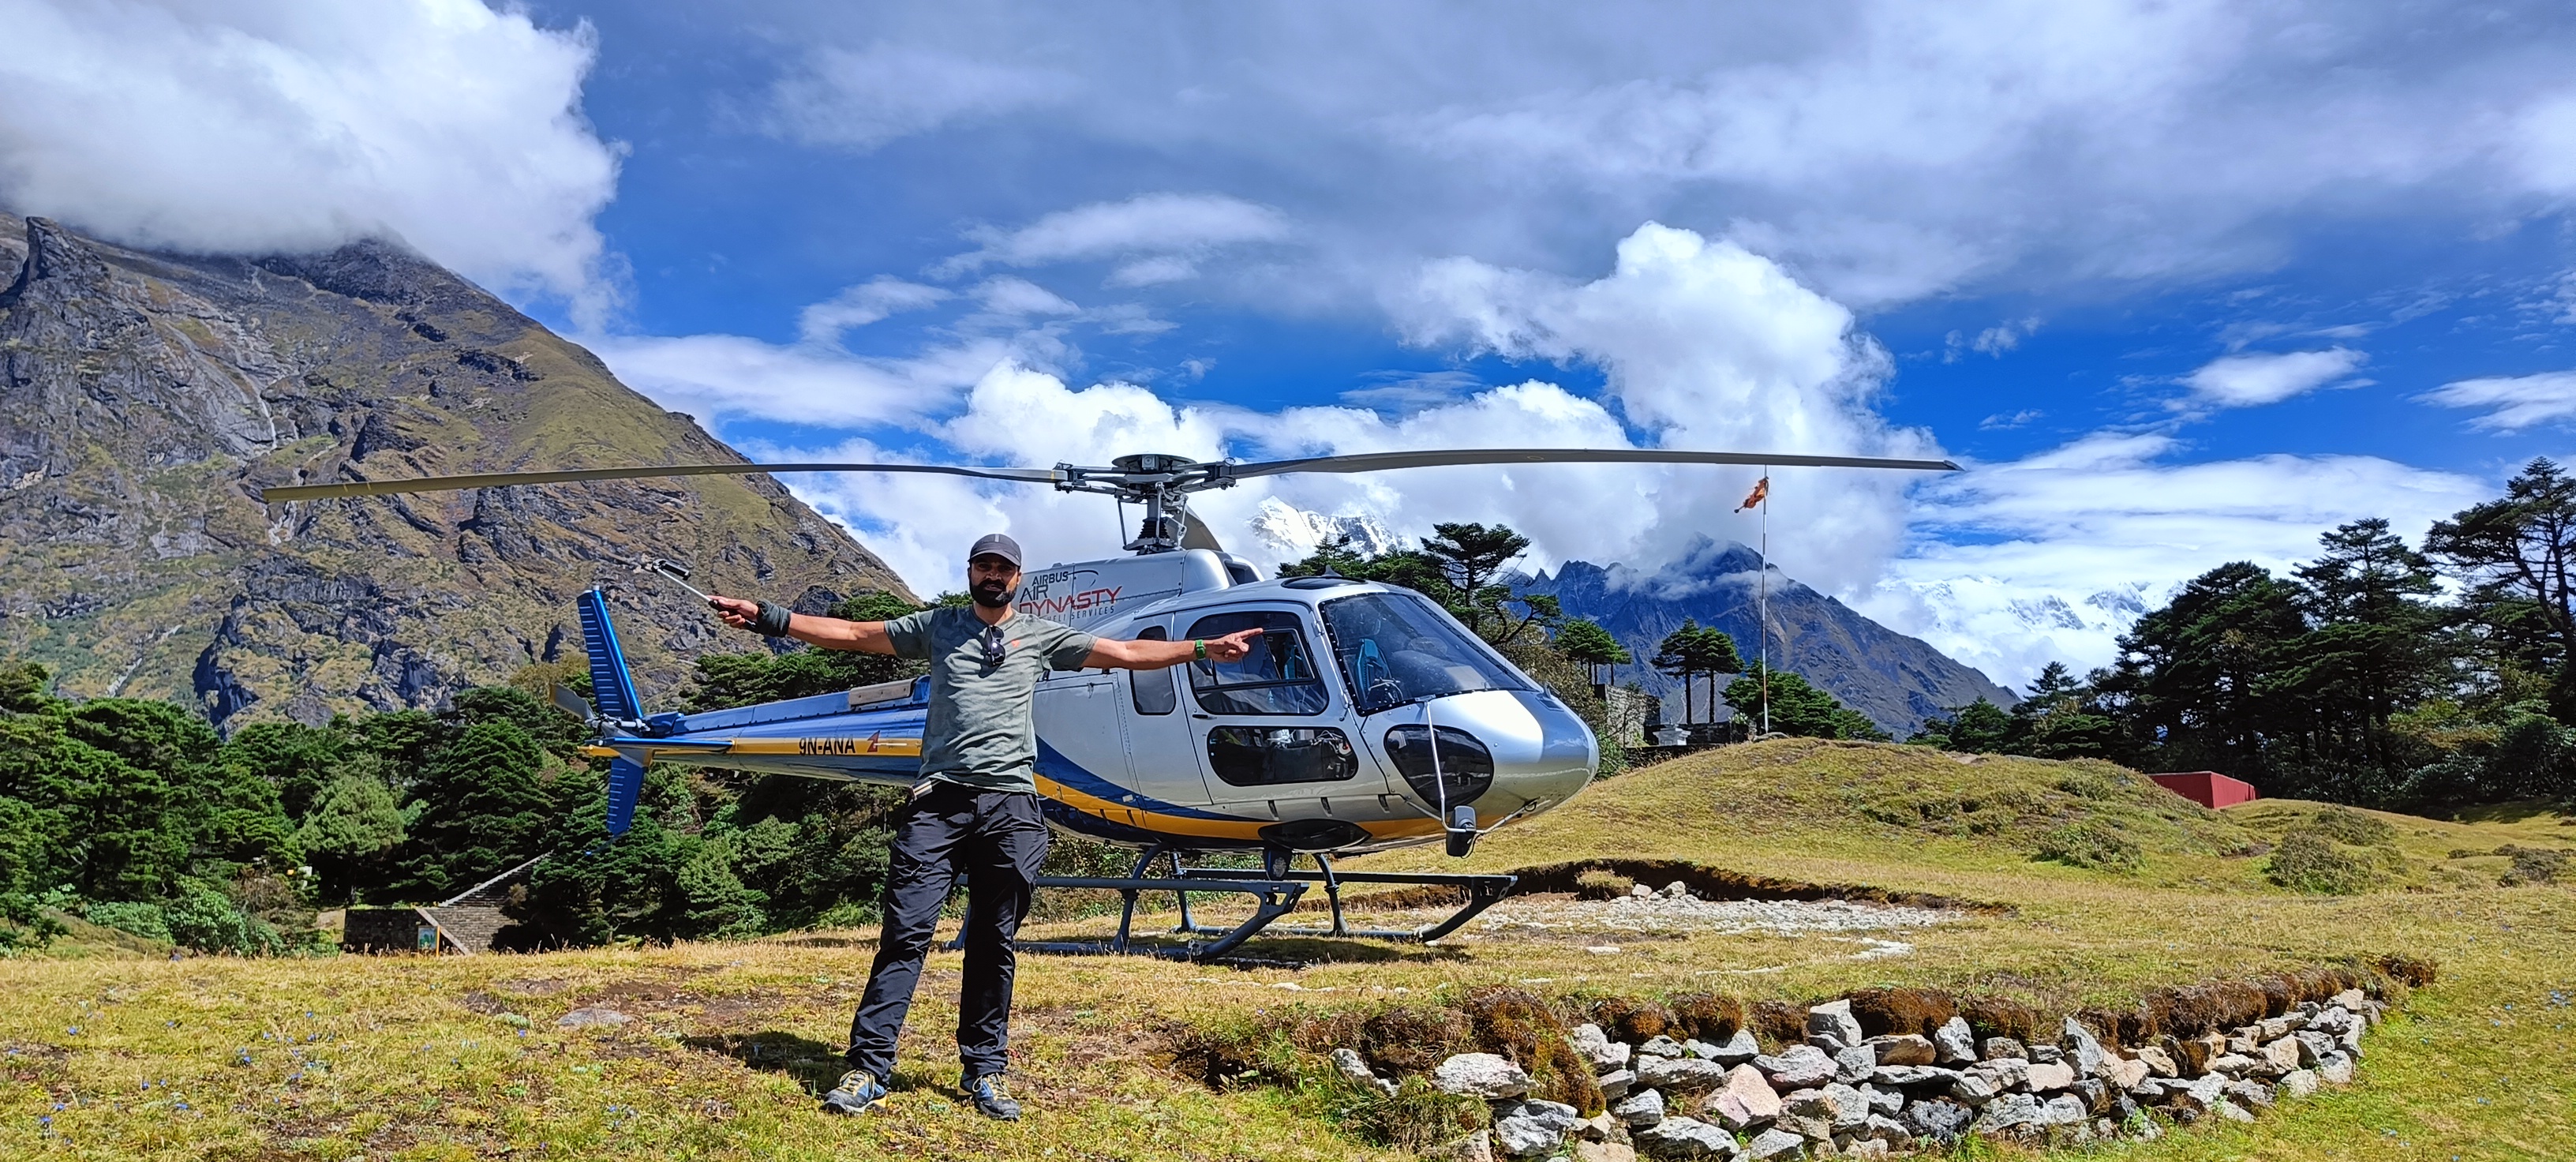 Everest Base Camp with a landing at the Everest View Hotel